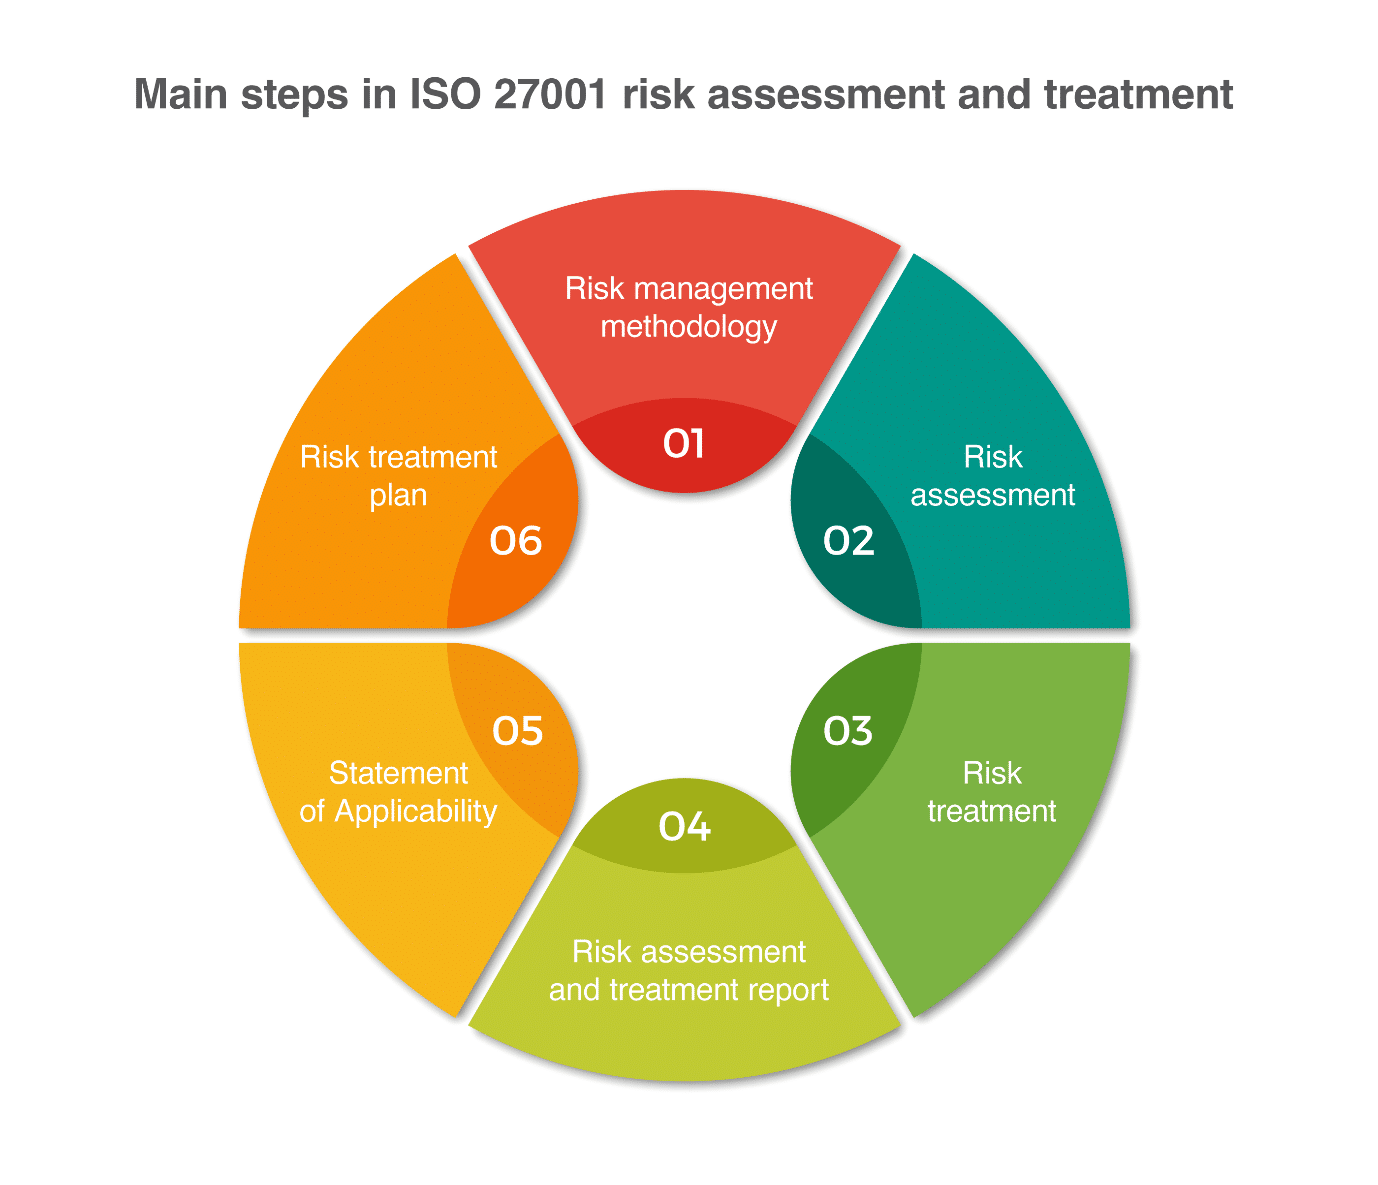 ISO 27001 Risk Assessment & Risk Treatment: The Complete Guide